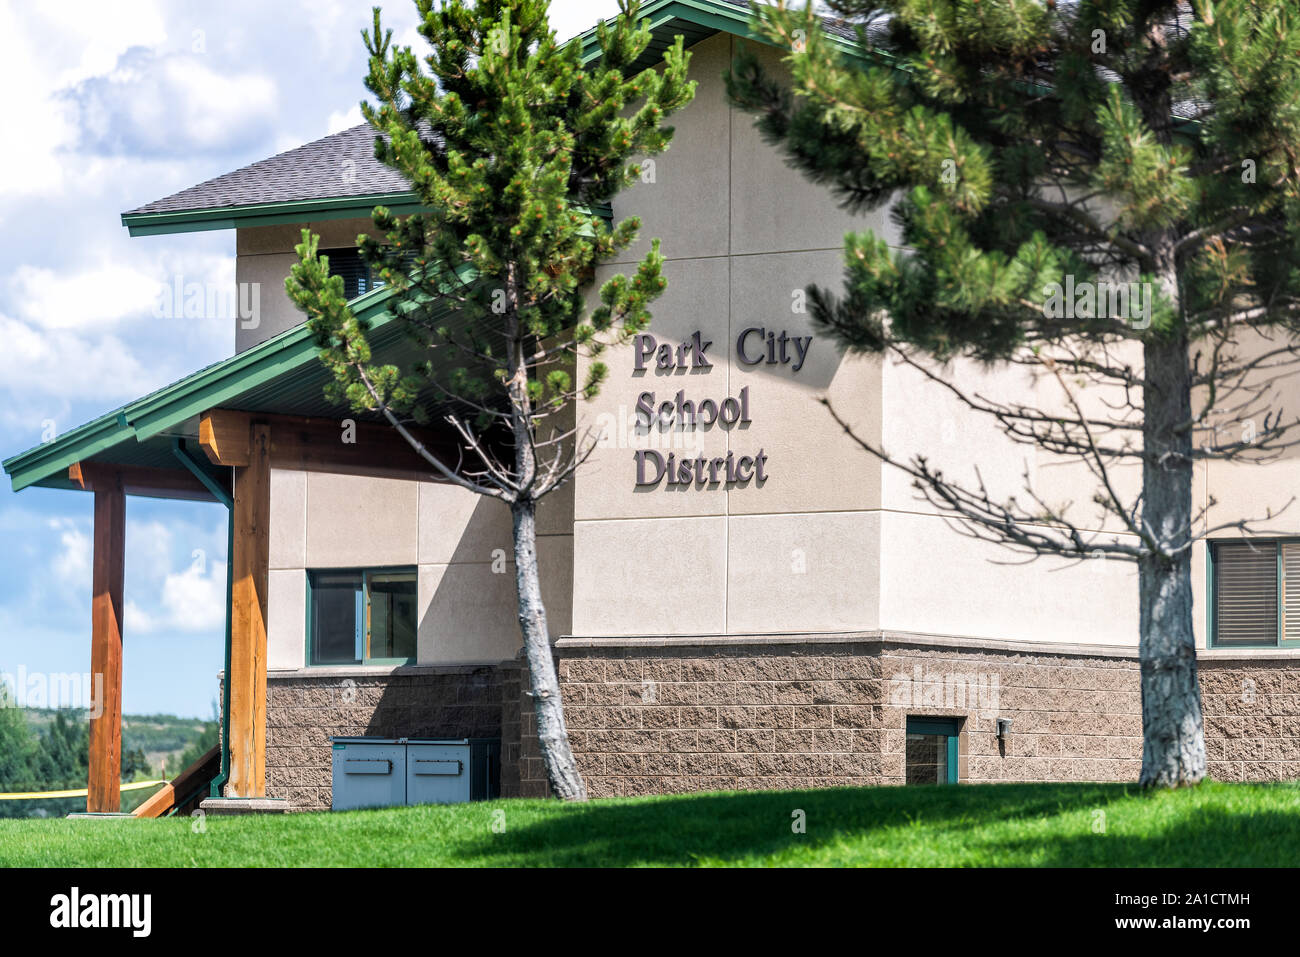 Park City, USA - July 25, 2019: School District building sign in ski resort town in Utah during summer with nobody Stock Photo